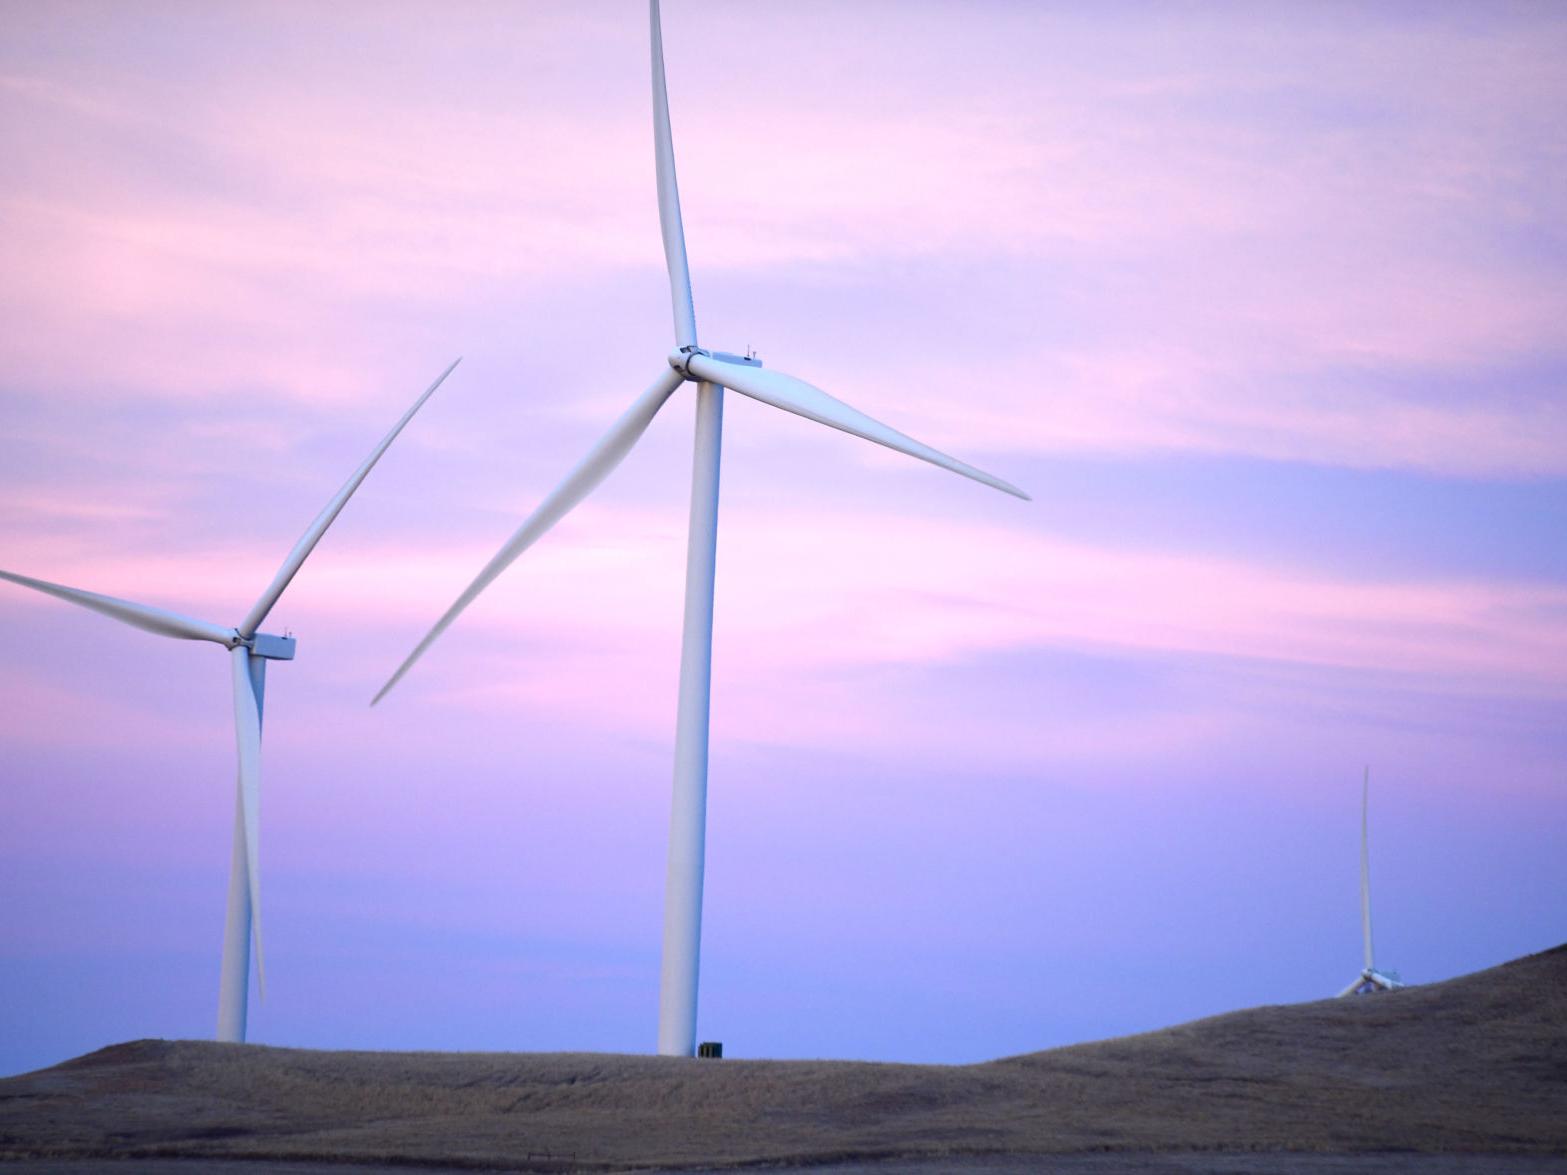 Proposal would give money to North Dakota coal plants by taxing wind power